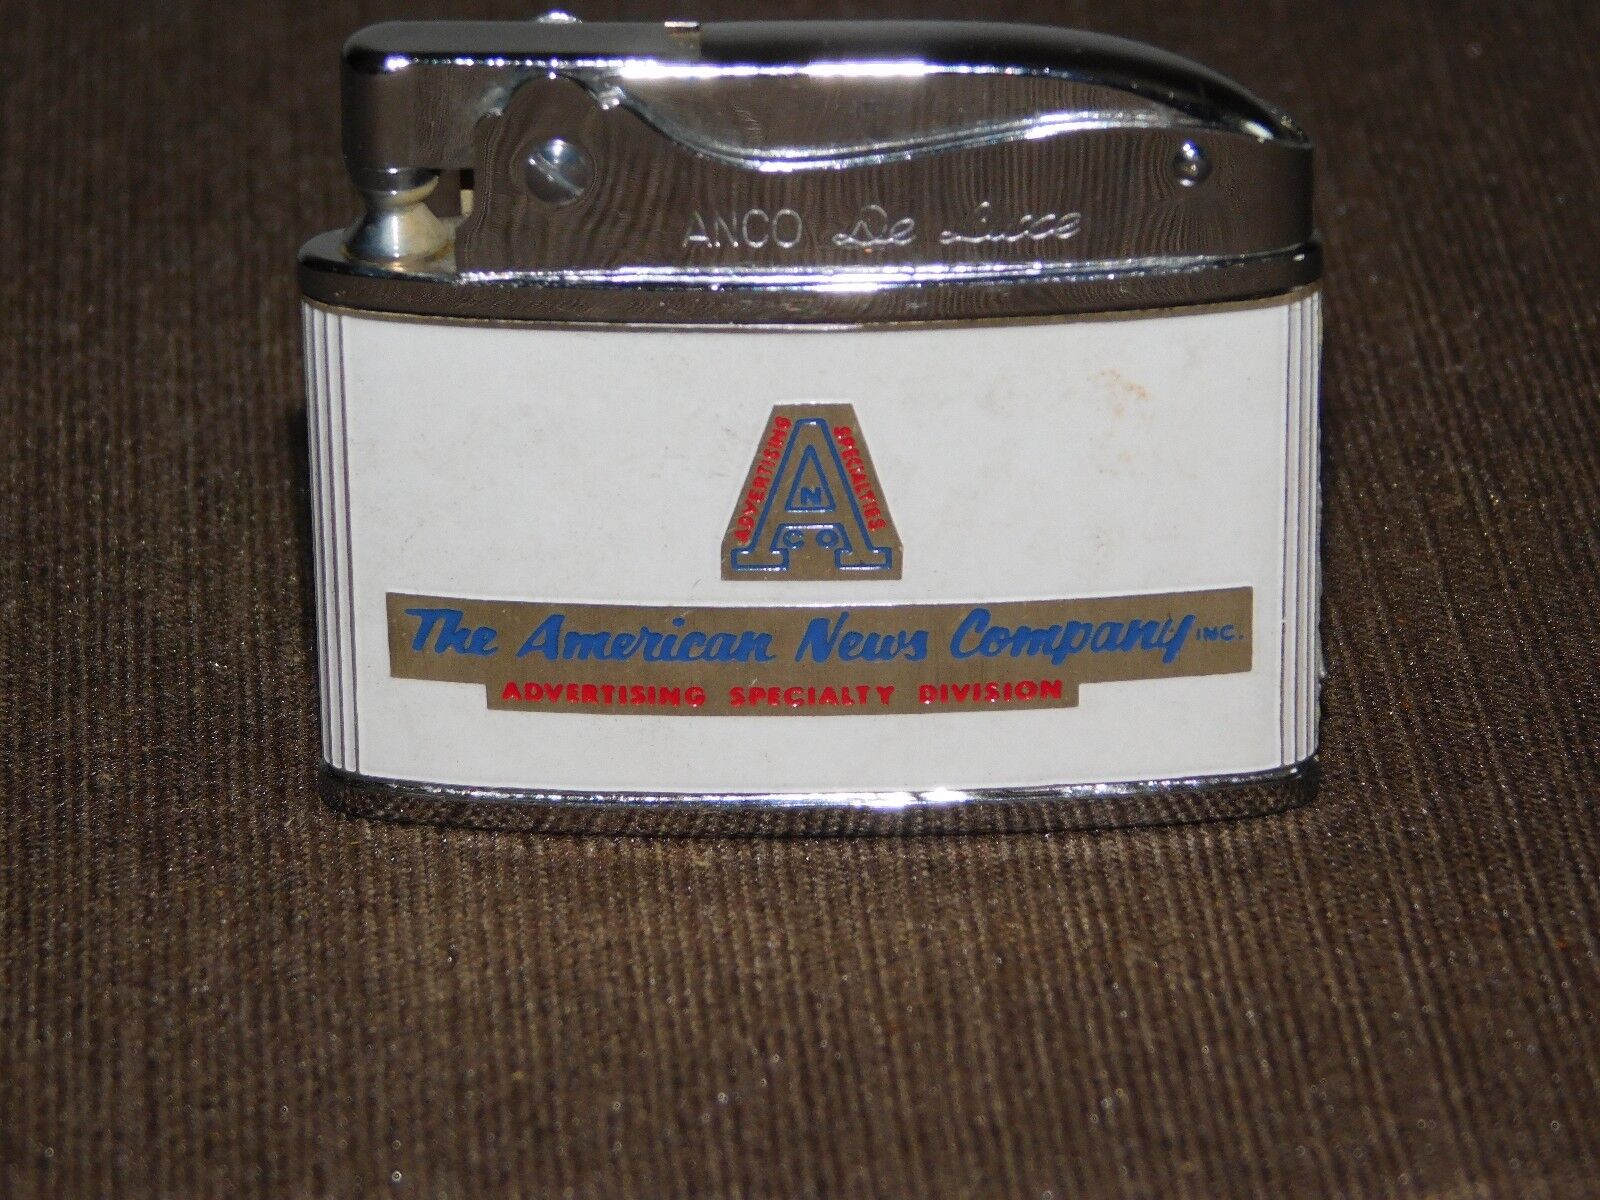 VINTAGE CIGARETTE LIGHTER ANCO DELUXE THE AMERICAN NEWS COMPANY NEW YORK 